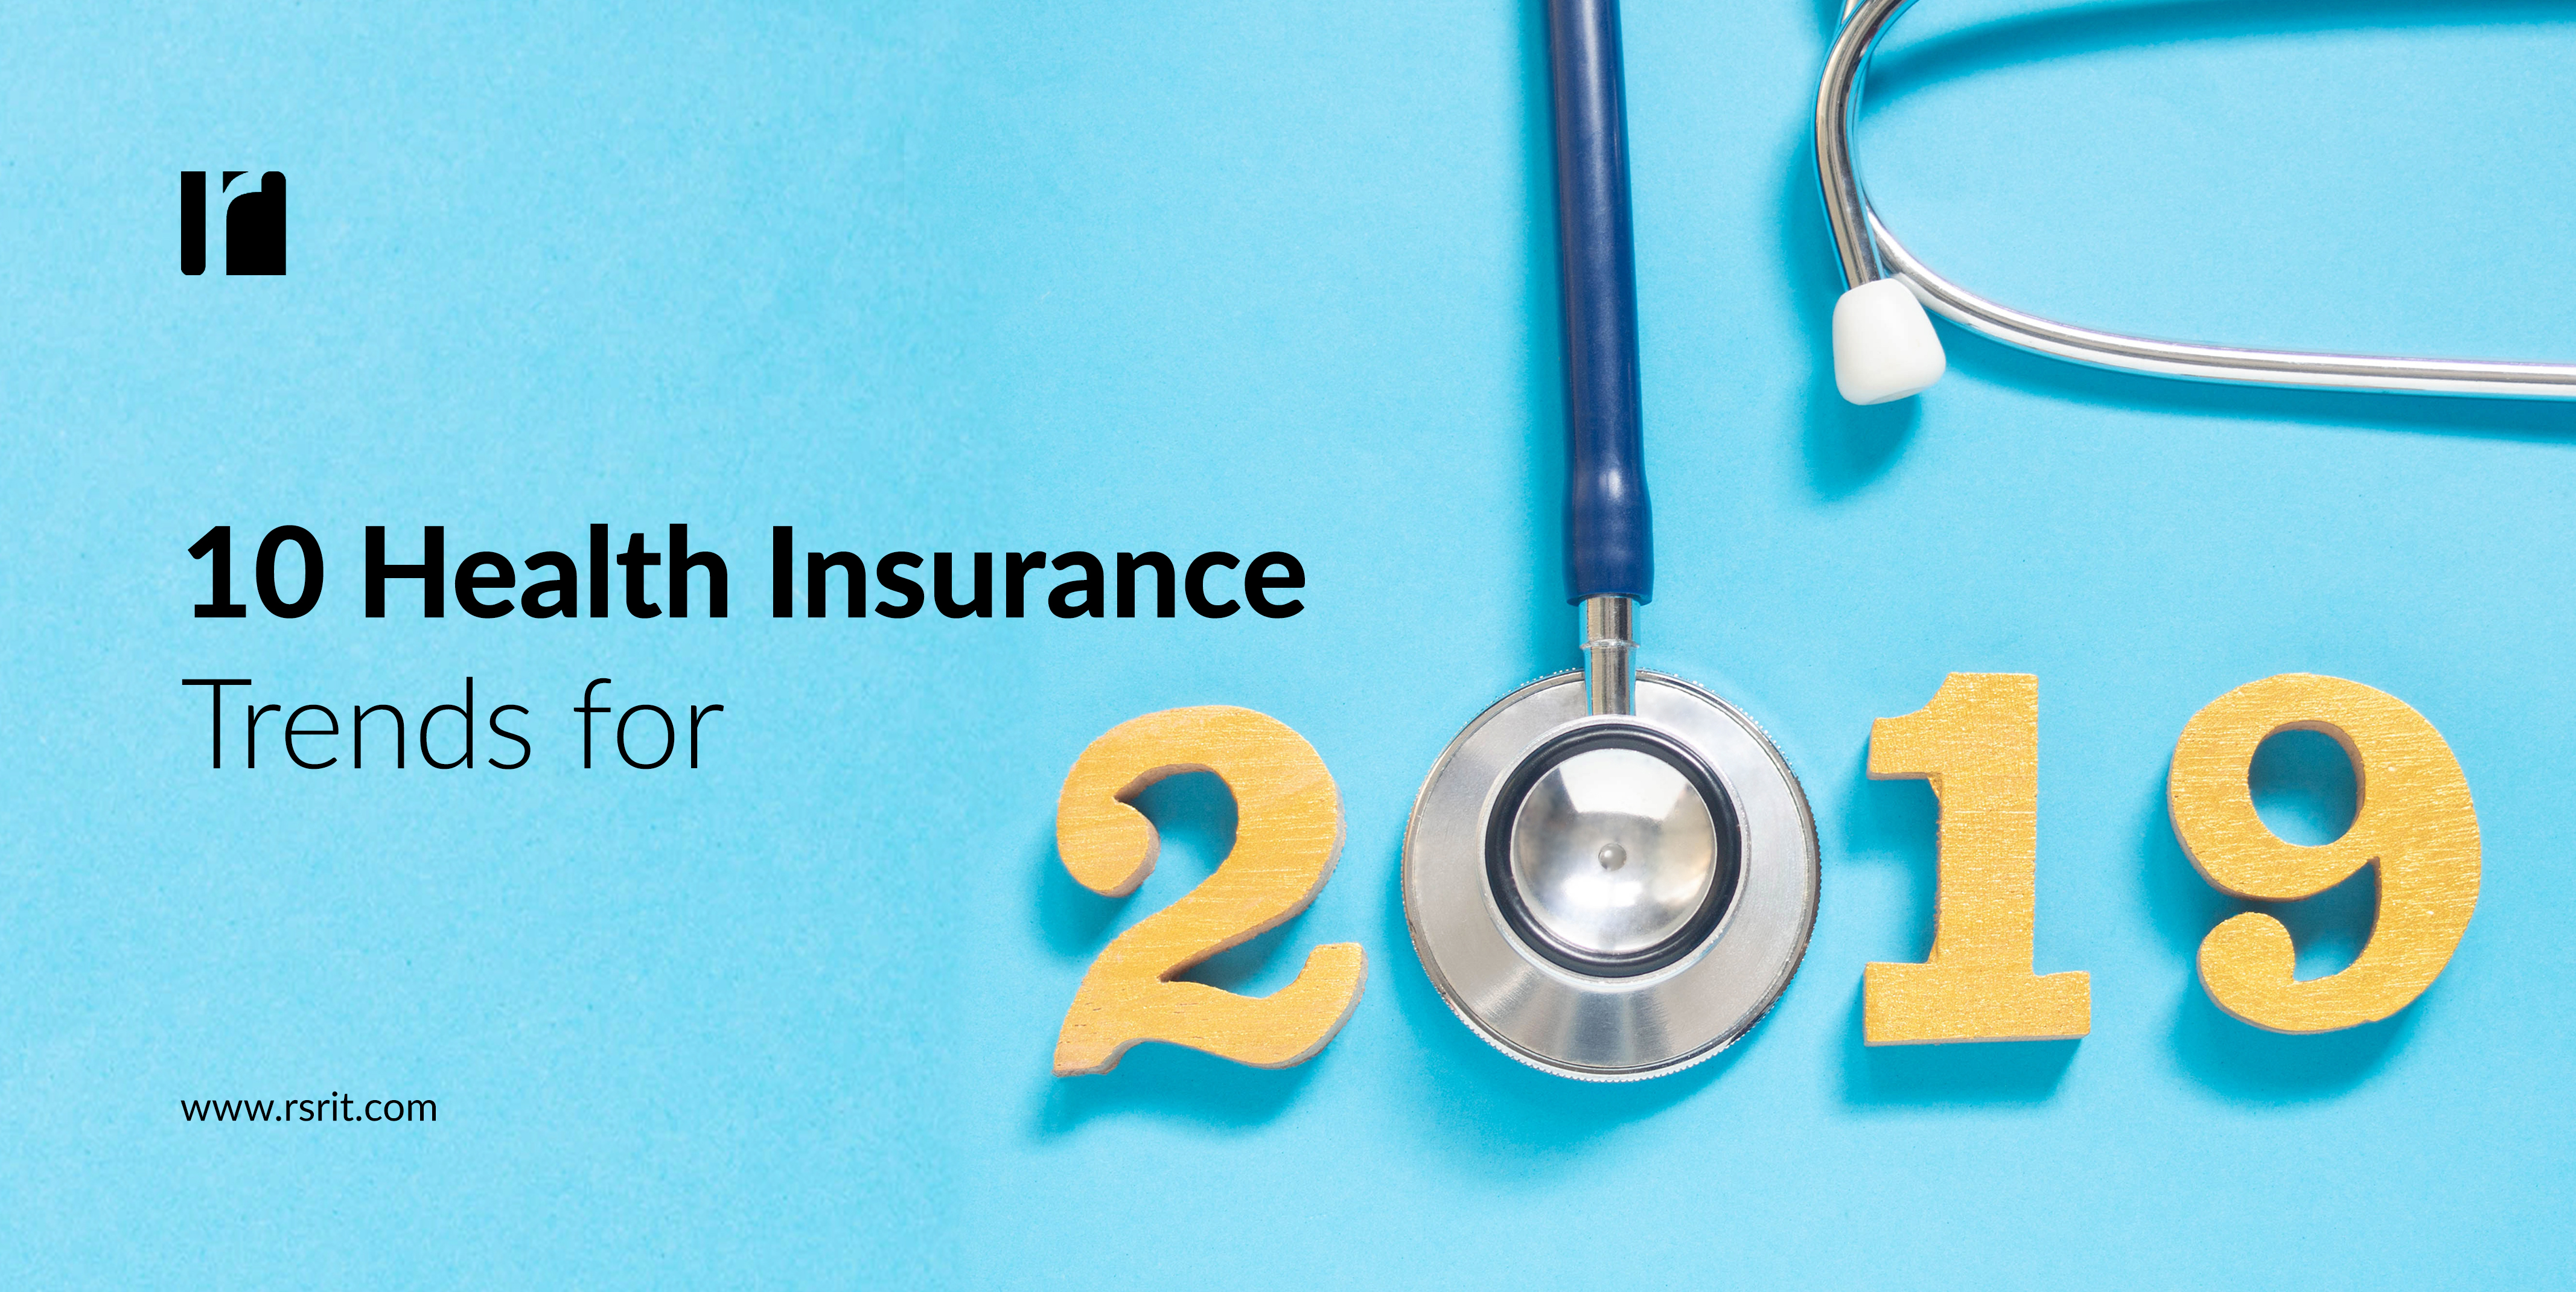 10 Health Insurance Trends for 2019